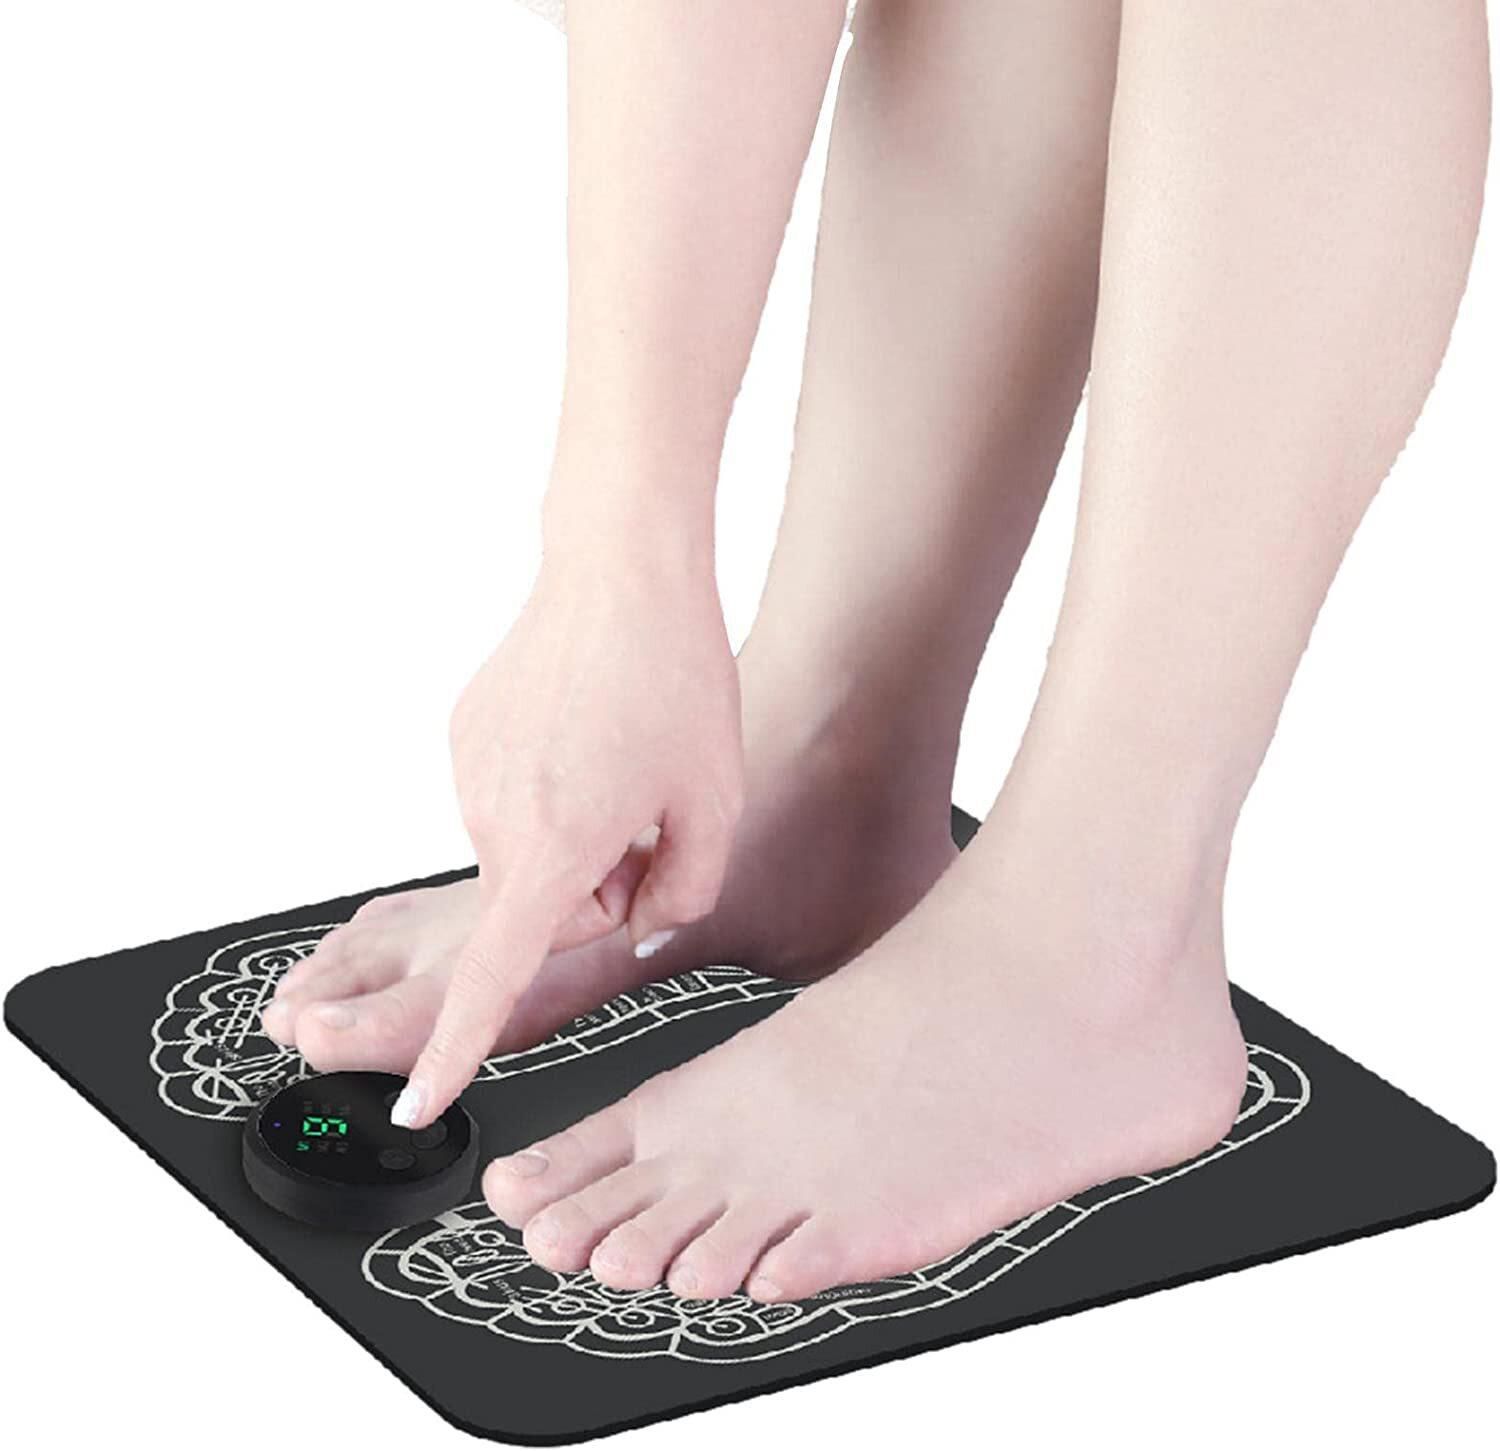 Generic Foot Massager Pad - 6 Modes Portable Foot Massager Machine, 9-Speed Adjustment Folding Foot Massage Pad, Foot Stimulating Massager For Home Use Generic